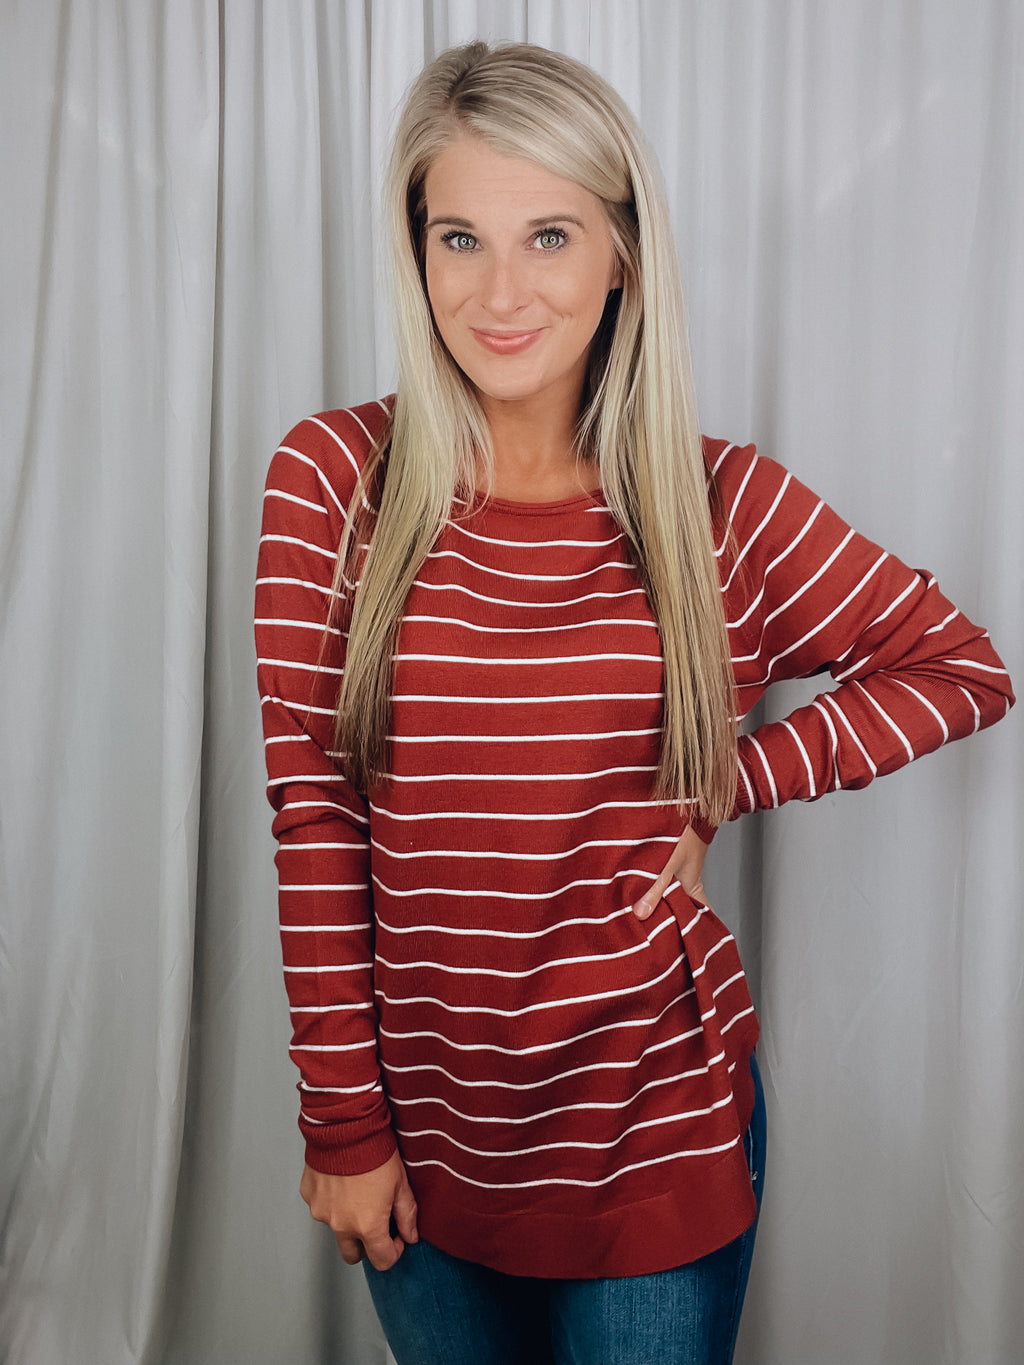 Top features a solid base color, ivory striped detailing, boat neck line, long sleeves, U-shaped hemline, and runs true to size! -rust